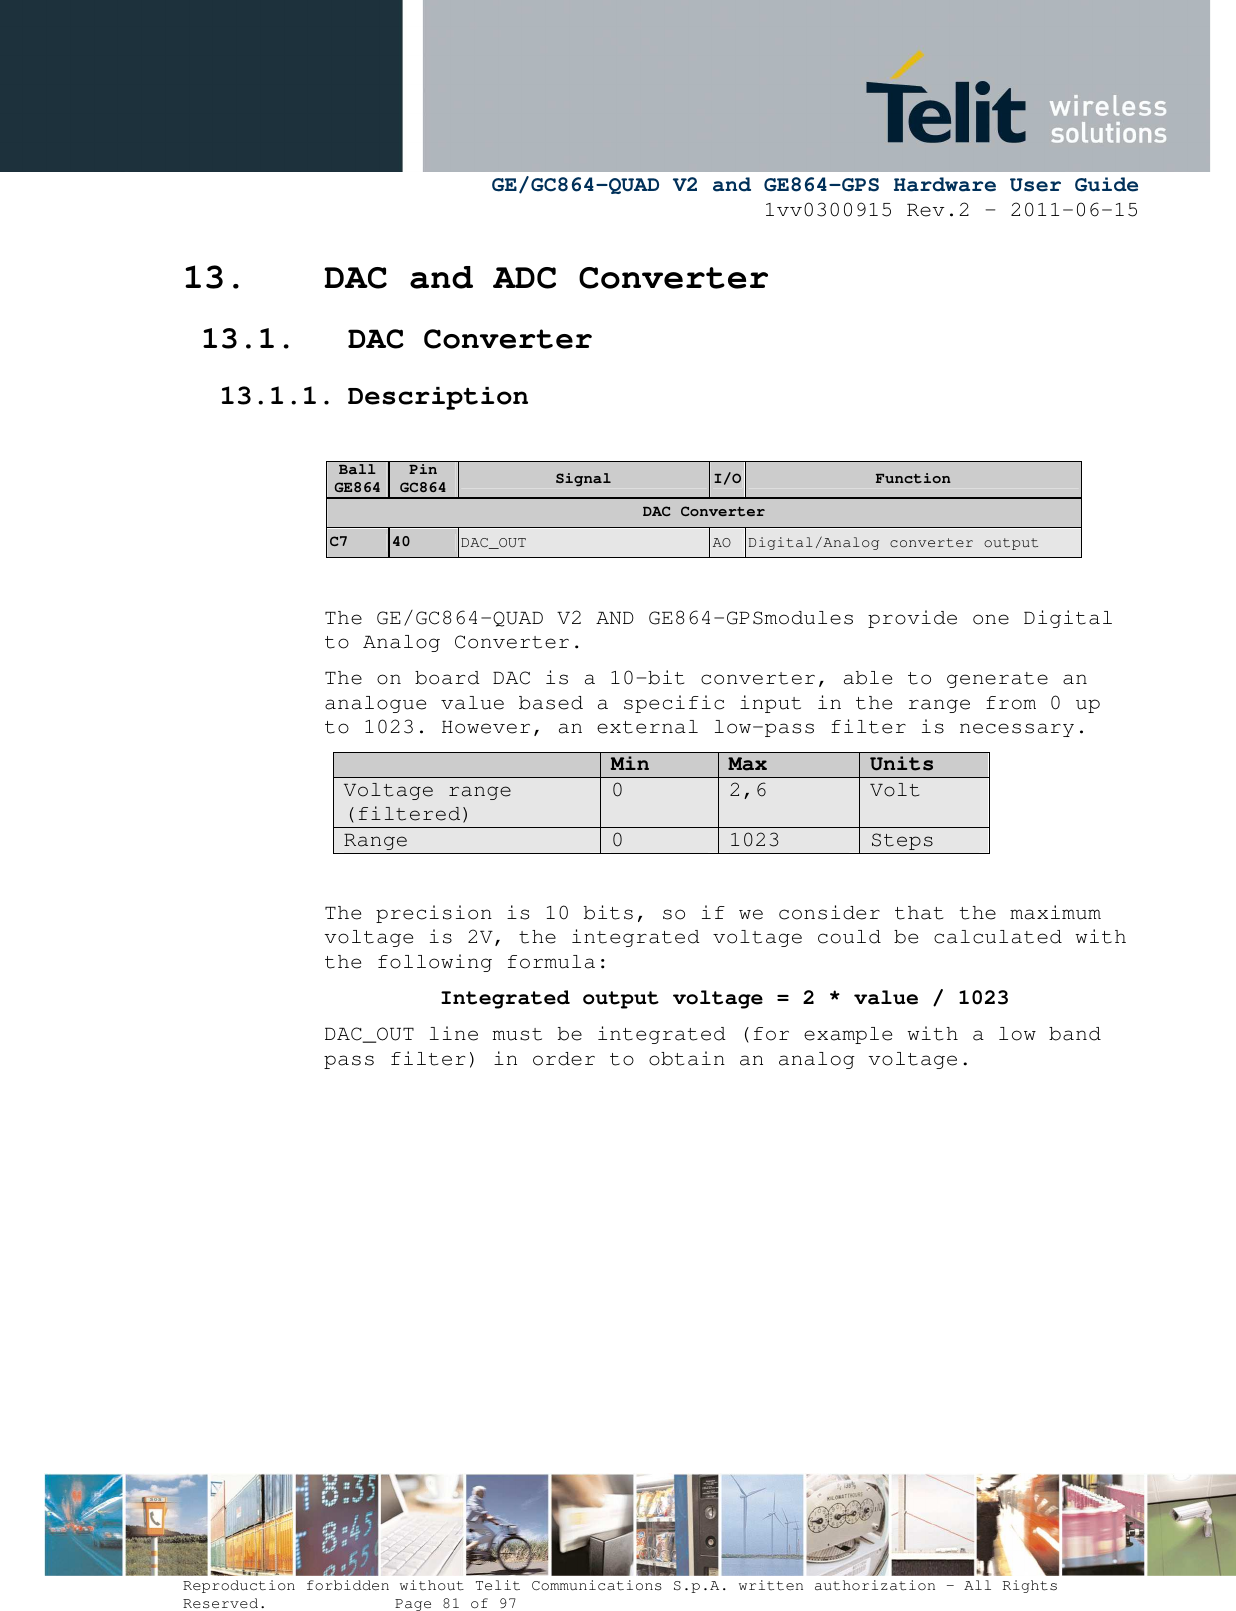      GE/GC864-QUAD V2 and GE864-GPS Hardware User Guide 1vv0300915 Rev.2 – 2011-06-15  Reproduction forbidden without Telit Communications S.p.A. written authorization - All Rights Reserved.    Page 81 of 97  13. DAC and ADC Converter 13.1. DAC Converter 13.1.1. Description  Ball GE864 Pin GC864  Signal  I/O Function DAC Converter C7  40  DAC_OUT  AO  Digital/Analog converter output  The GE/GC864-QUAD V2 AND GE864-GPSmodules provide one Digital to Analog Converter.  The on board DAC is a 10-bit converter, able to generate an analogue value based a specific input in the range from 0 up to 1023. However, an external low-pass filter is necessary.  Min Max Units Voltage range (filtered) 0  2,6  Volt Range  0  1023  Steps  The precision is 10 bits, so if we consider that the maximum voltage is 2V, the integrated voltage could be calculated with the following formula:   Integrated output voltage = 2 * value / 1023 DAC_OUT line must be integrated (for example with a low band pass filter) in order to obtain an analog voltage.          